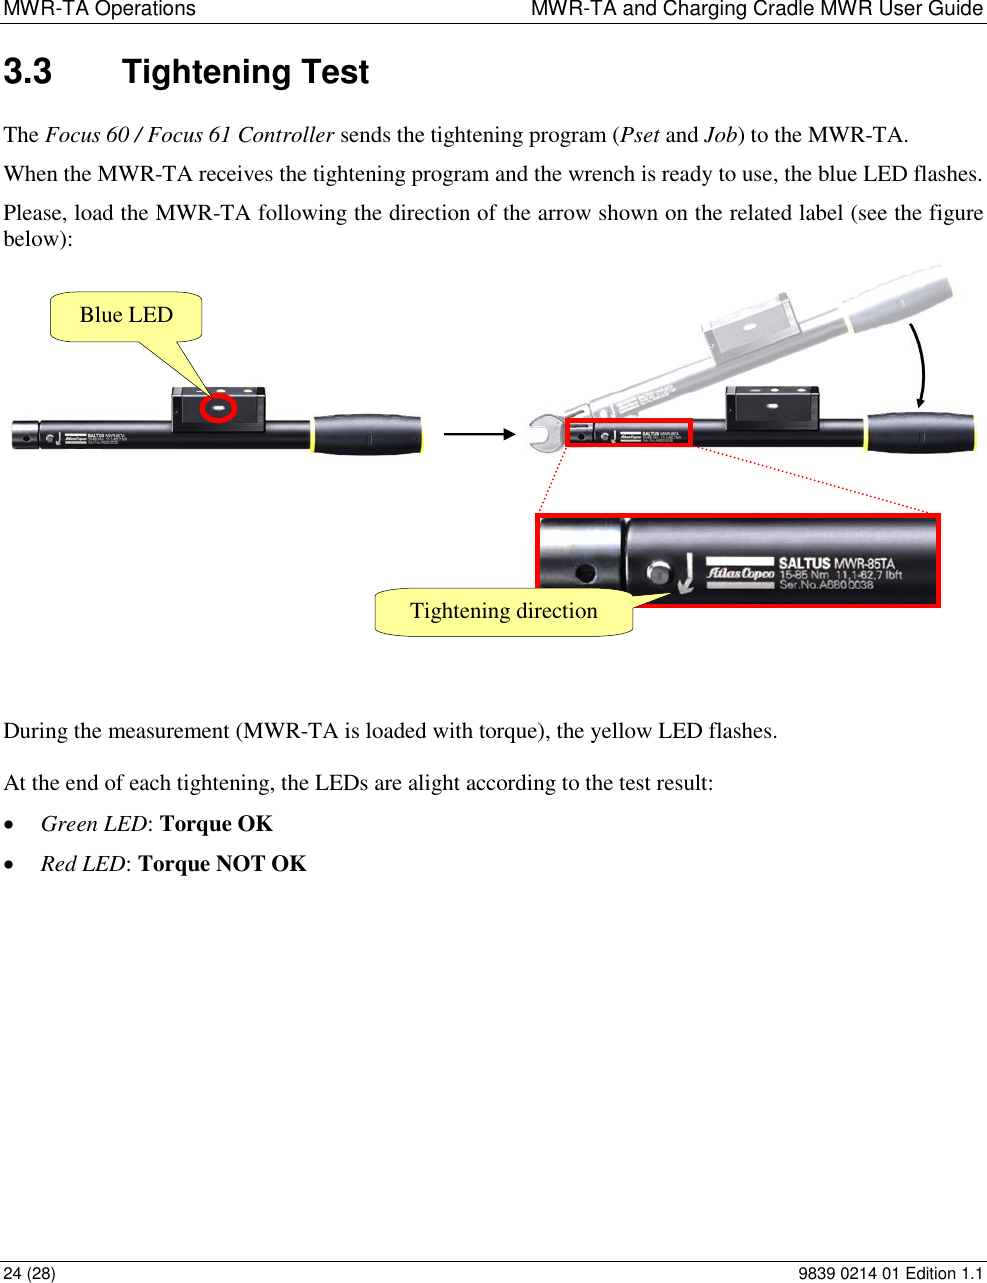 MWR-TA Operations  MWR-TA and Charging Cradle MWR User Guide 24 (28)  9839 0214 01 Edition 1.1 3.3  Tightening Test The Focus 60 / Focus 61 Controller sends the tightening program (Pset and Job) to the MWR-TA. When the MWR-TA receives the tightening program and the wrench is ready to use, the blue LED flashes.  Please, load the MWR-TA following the direction of the arrow shown on the related label (see the figure below):    During the measurement (MWR-TA is loaded with torque), the yellow LED flashes.  At the end of each tightening, the LEDs are alight according to the test result:  Green LED: Torque OK  Red LED: Torque NOT OK  Blue LED Tightening direction 